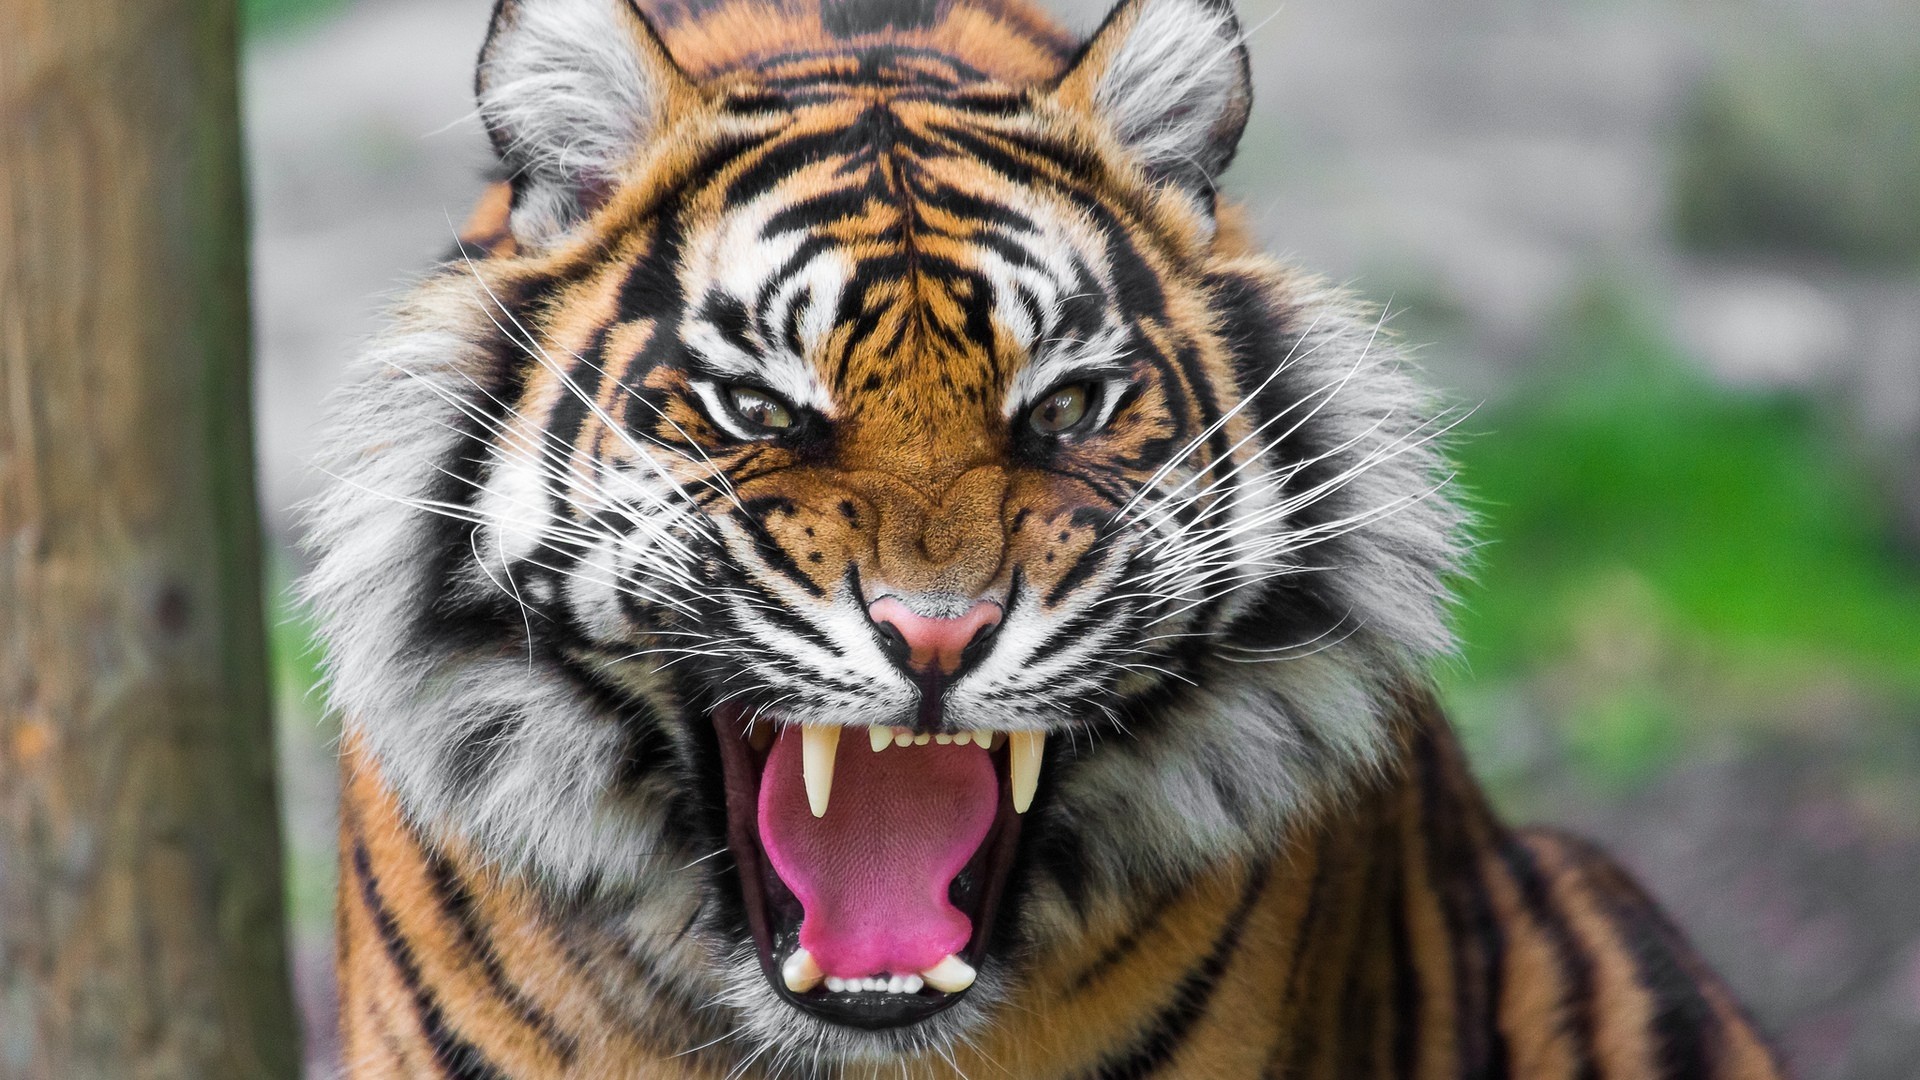 Angry Tiger Hd Wallpaper For Mobile